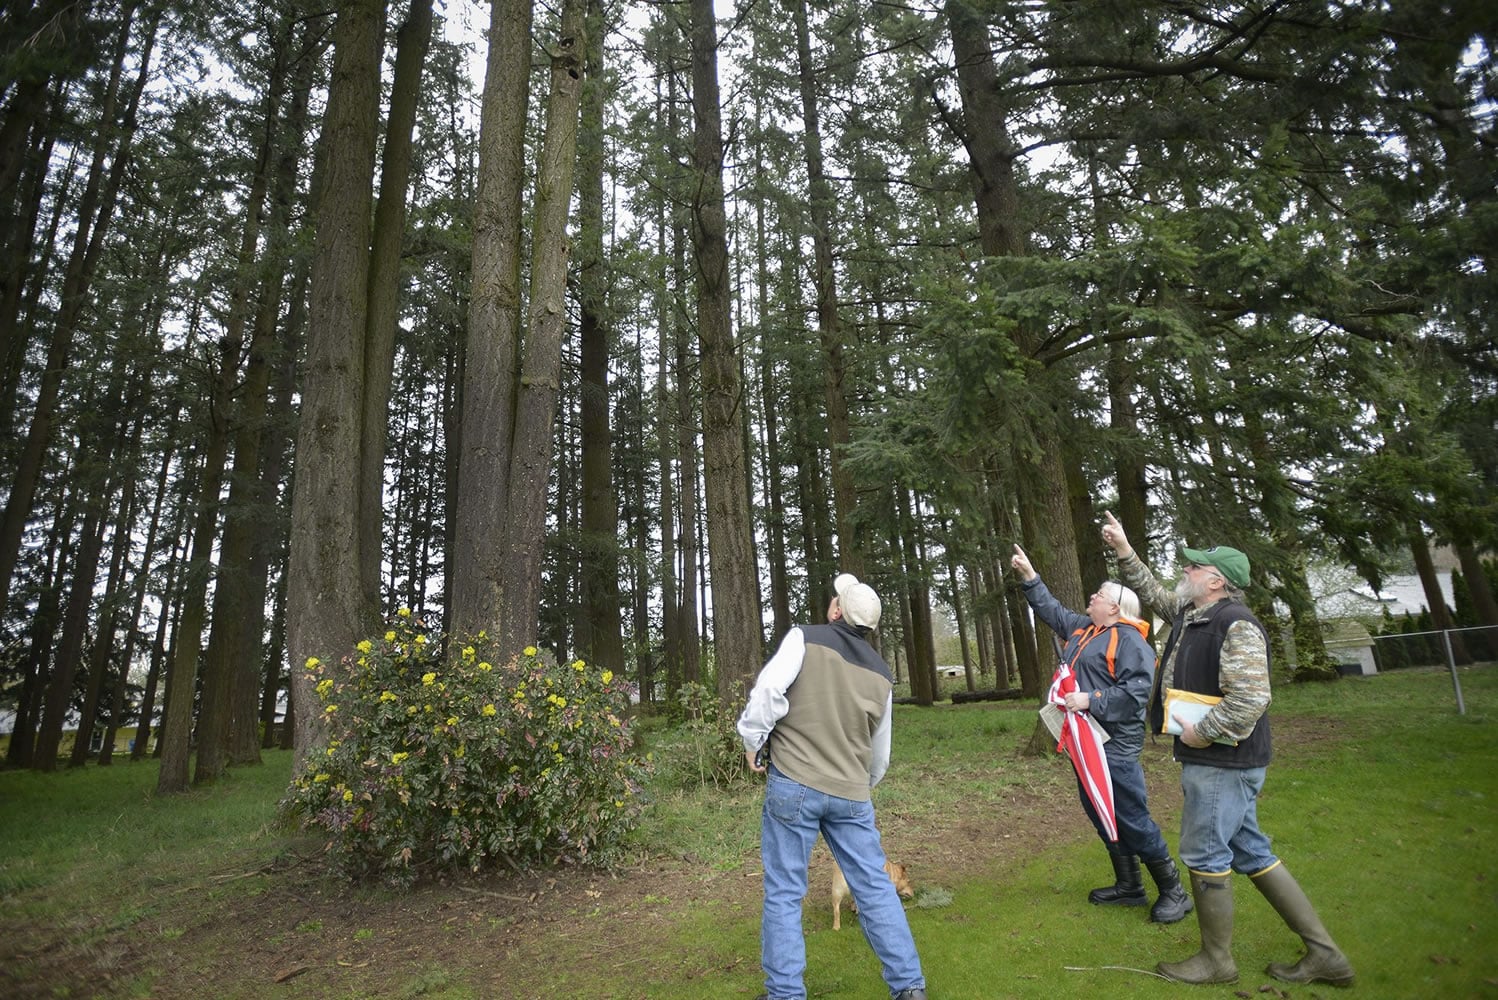 Skip Paynter, from left, Joan McConnell and Steve Wille, residents in the Countryside Woods neighborhood, look at a woodpecker hole in a tree March 8 at Countryside Park in Vancouver. The neighborhood association obtained a grant in November from the Vancouver Watersheds Alliance to purchase native plants for the park.